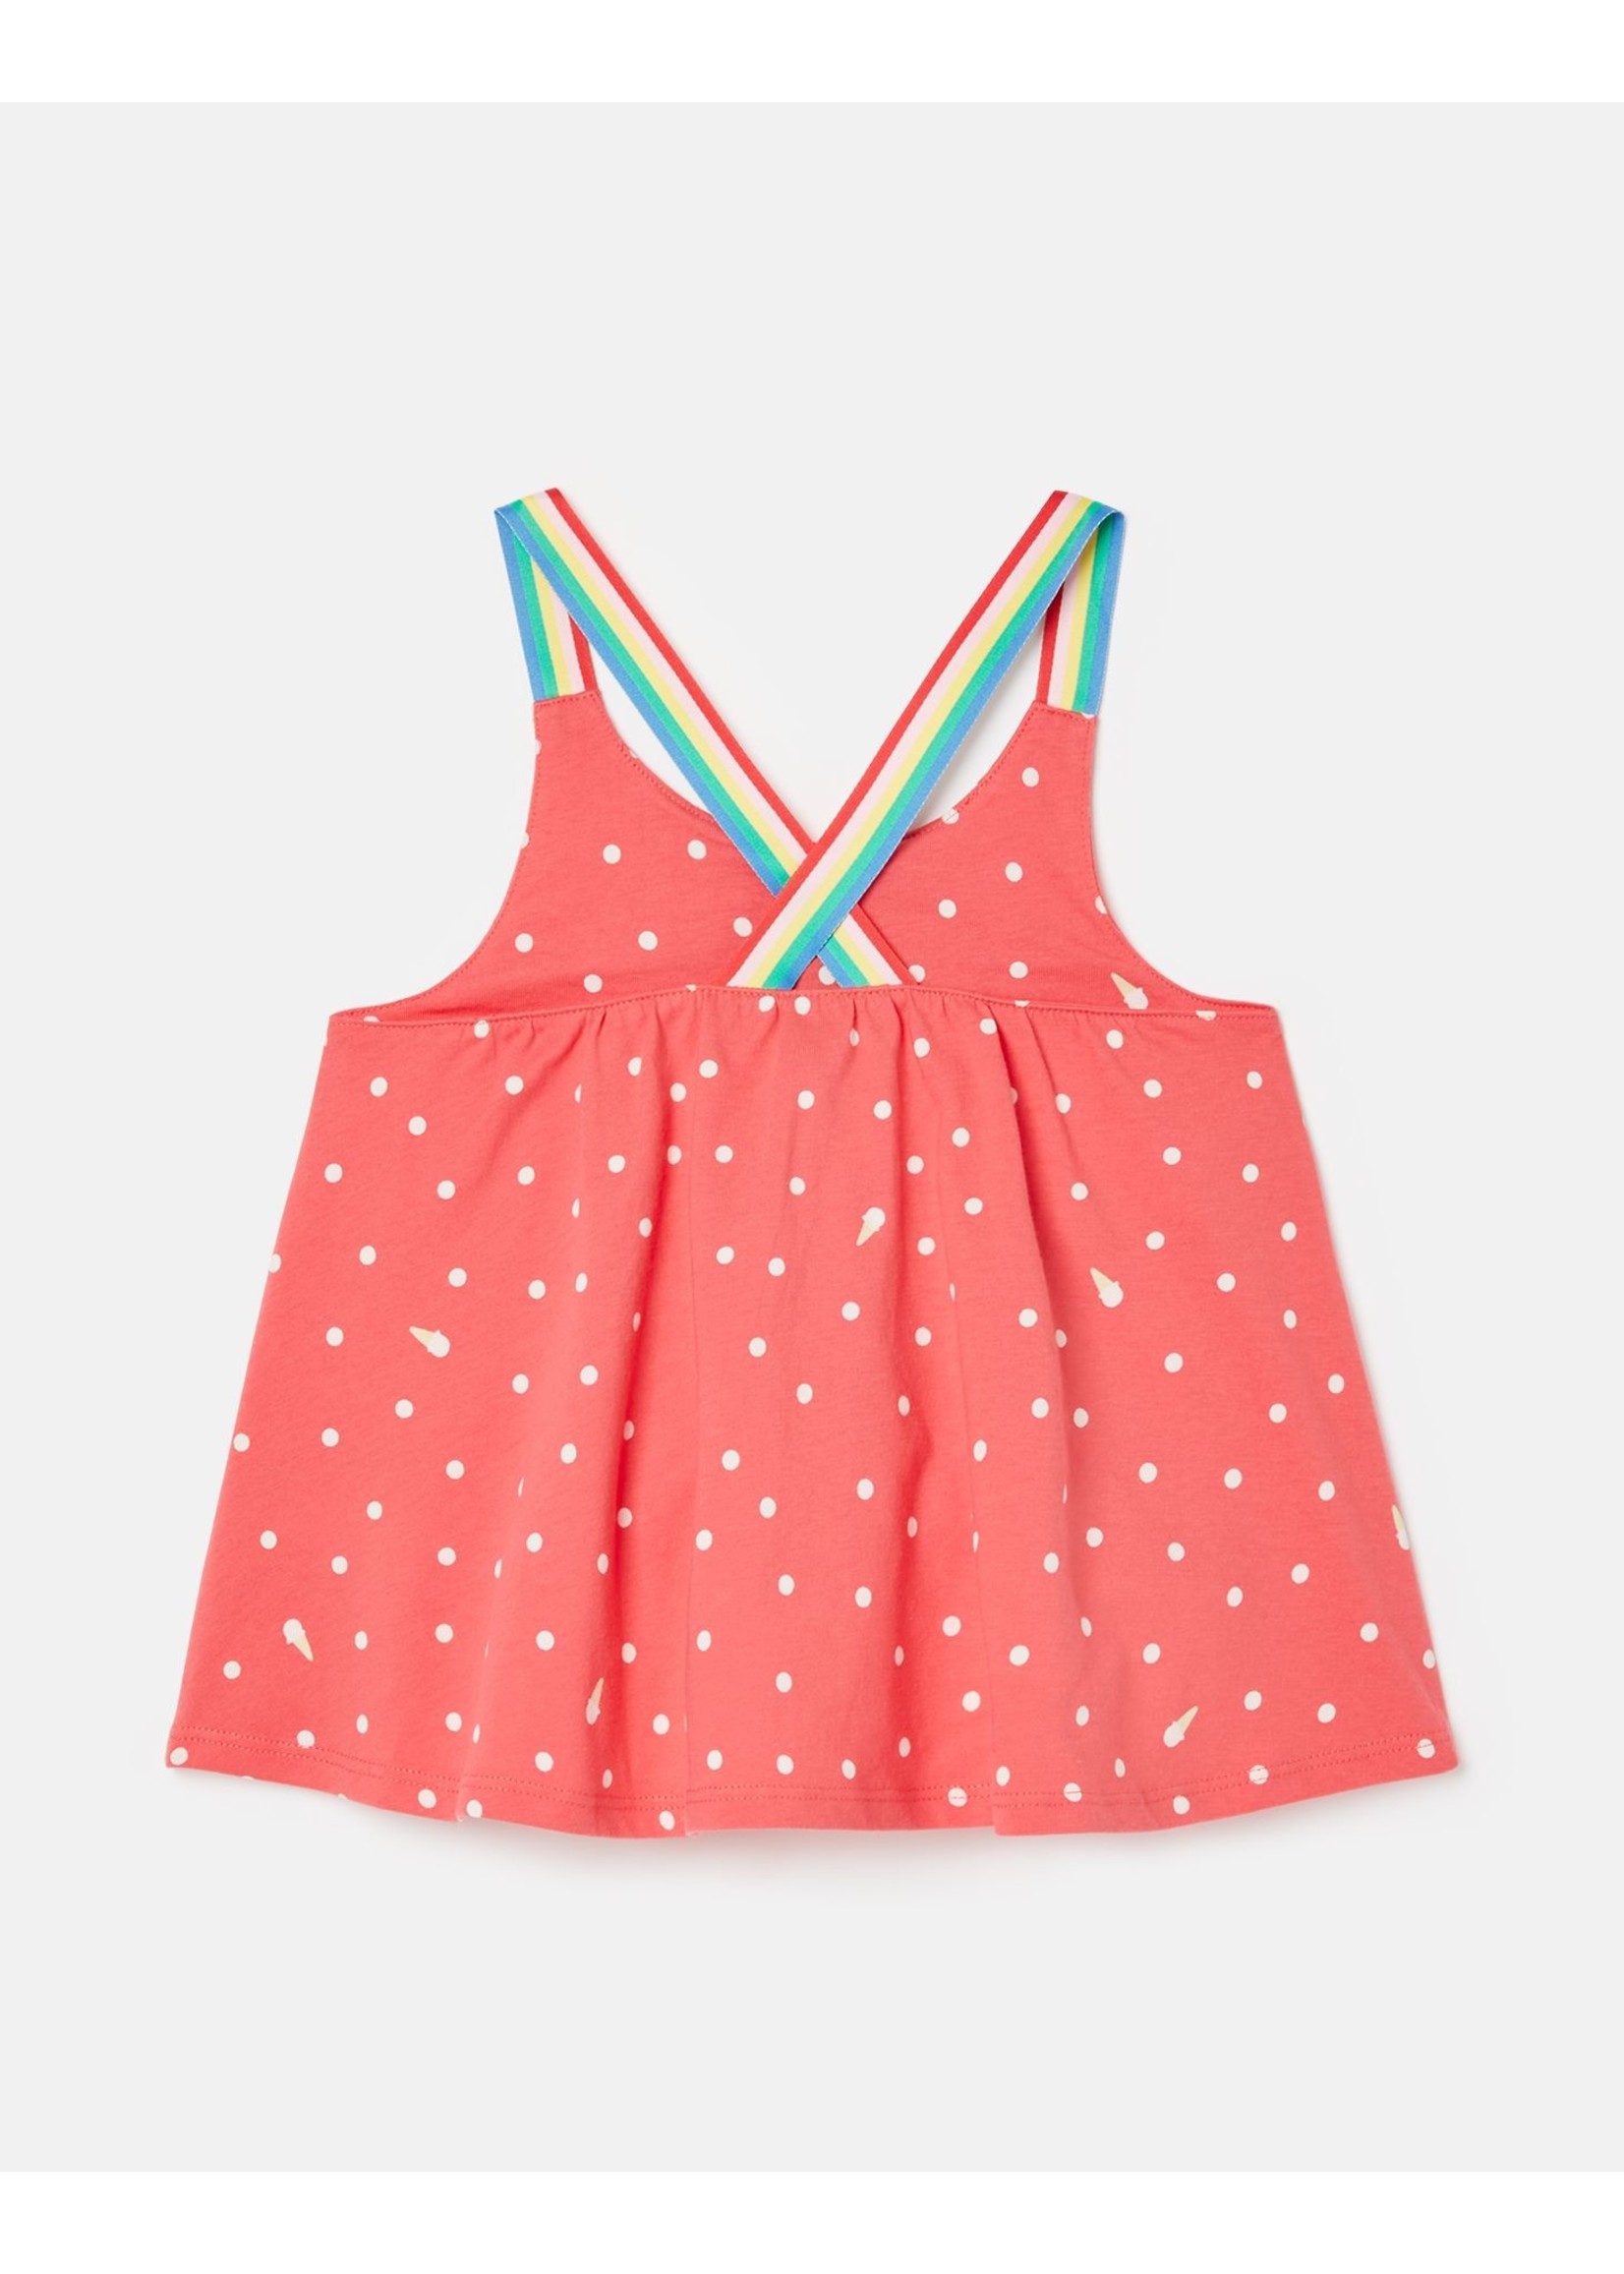 Joules Pink Dot Rainbow Strap Top